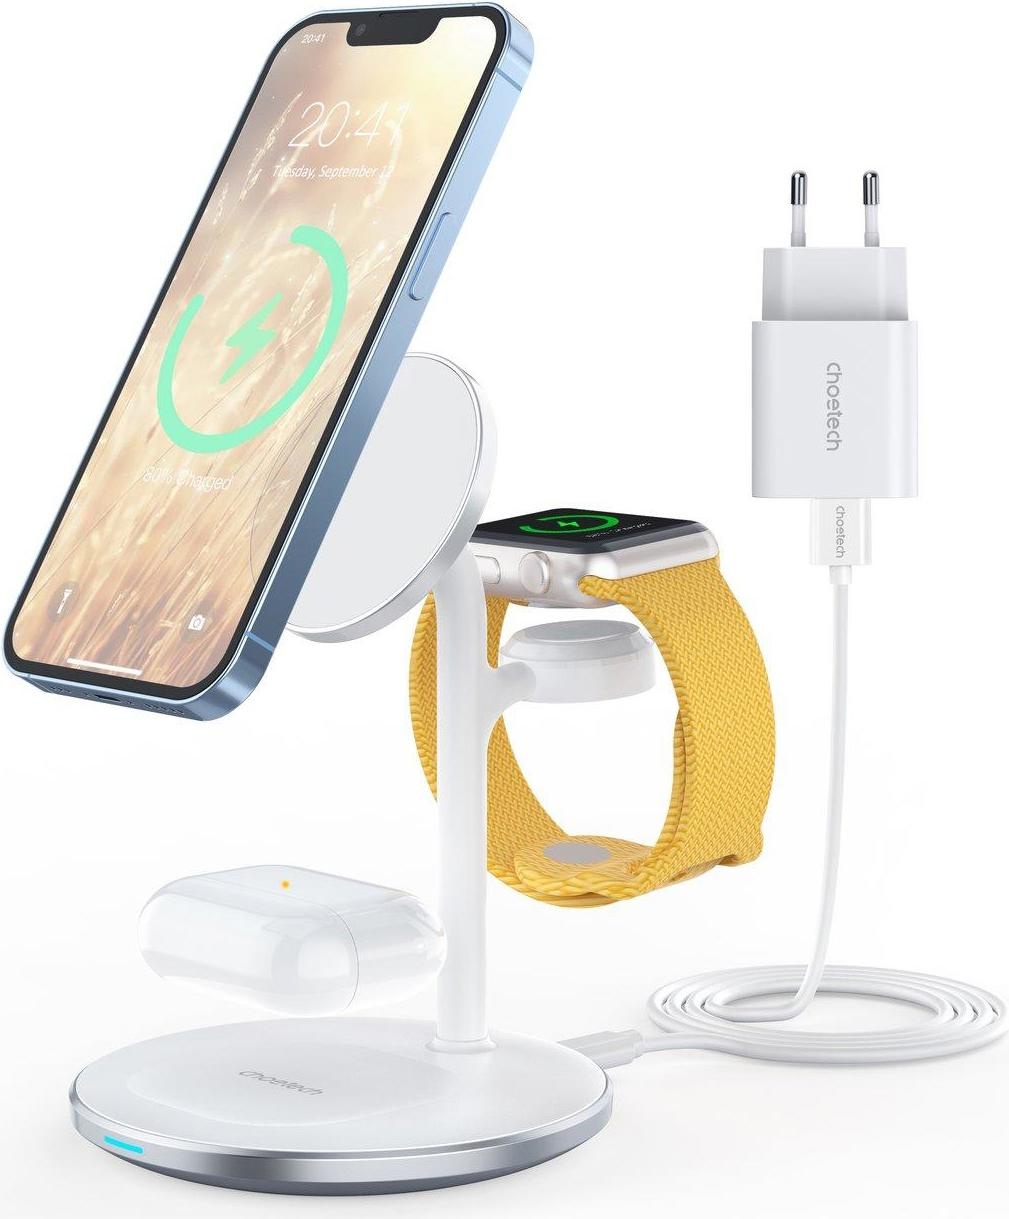 Choetech 3 in 1 Charging Station (15 W), Wireless Charger, Weiss